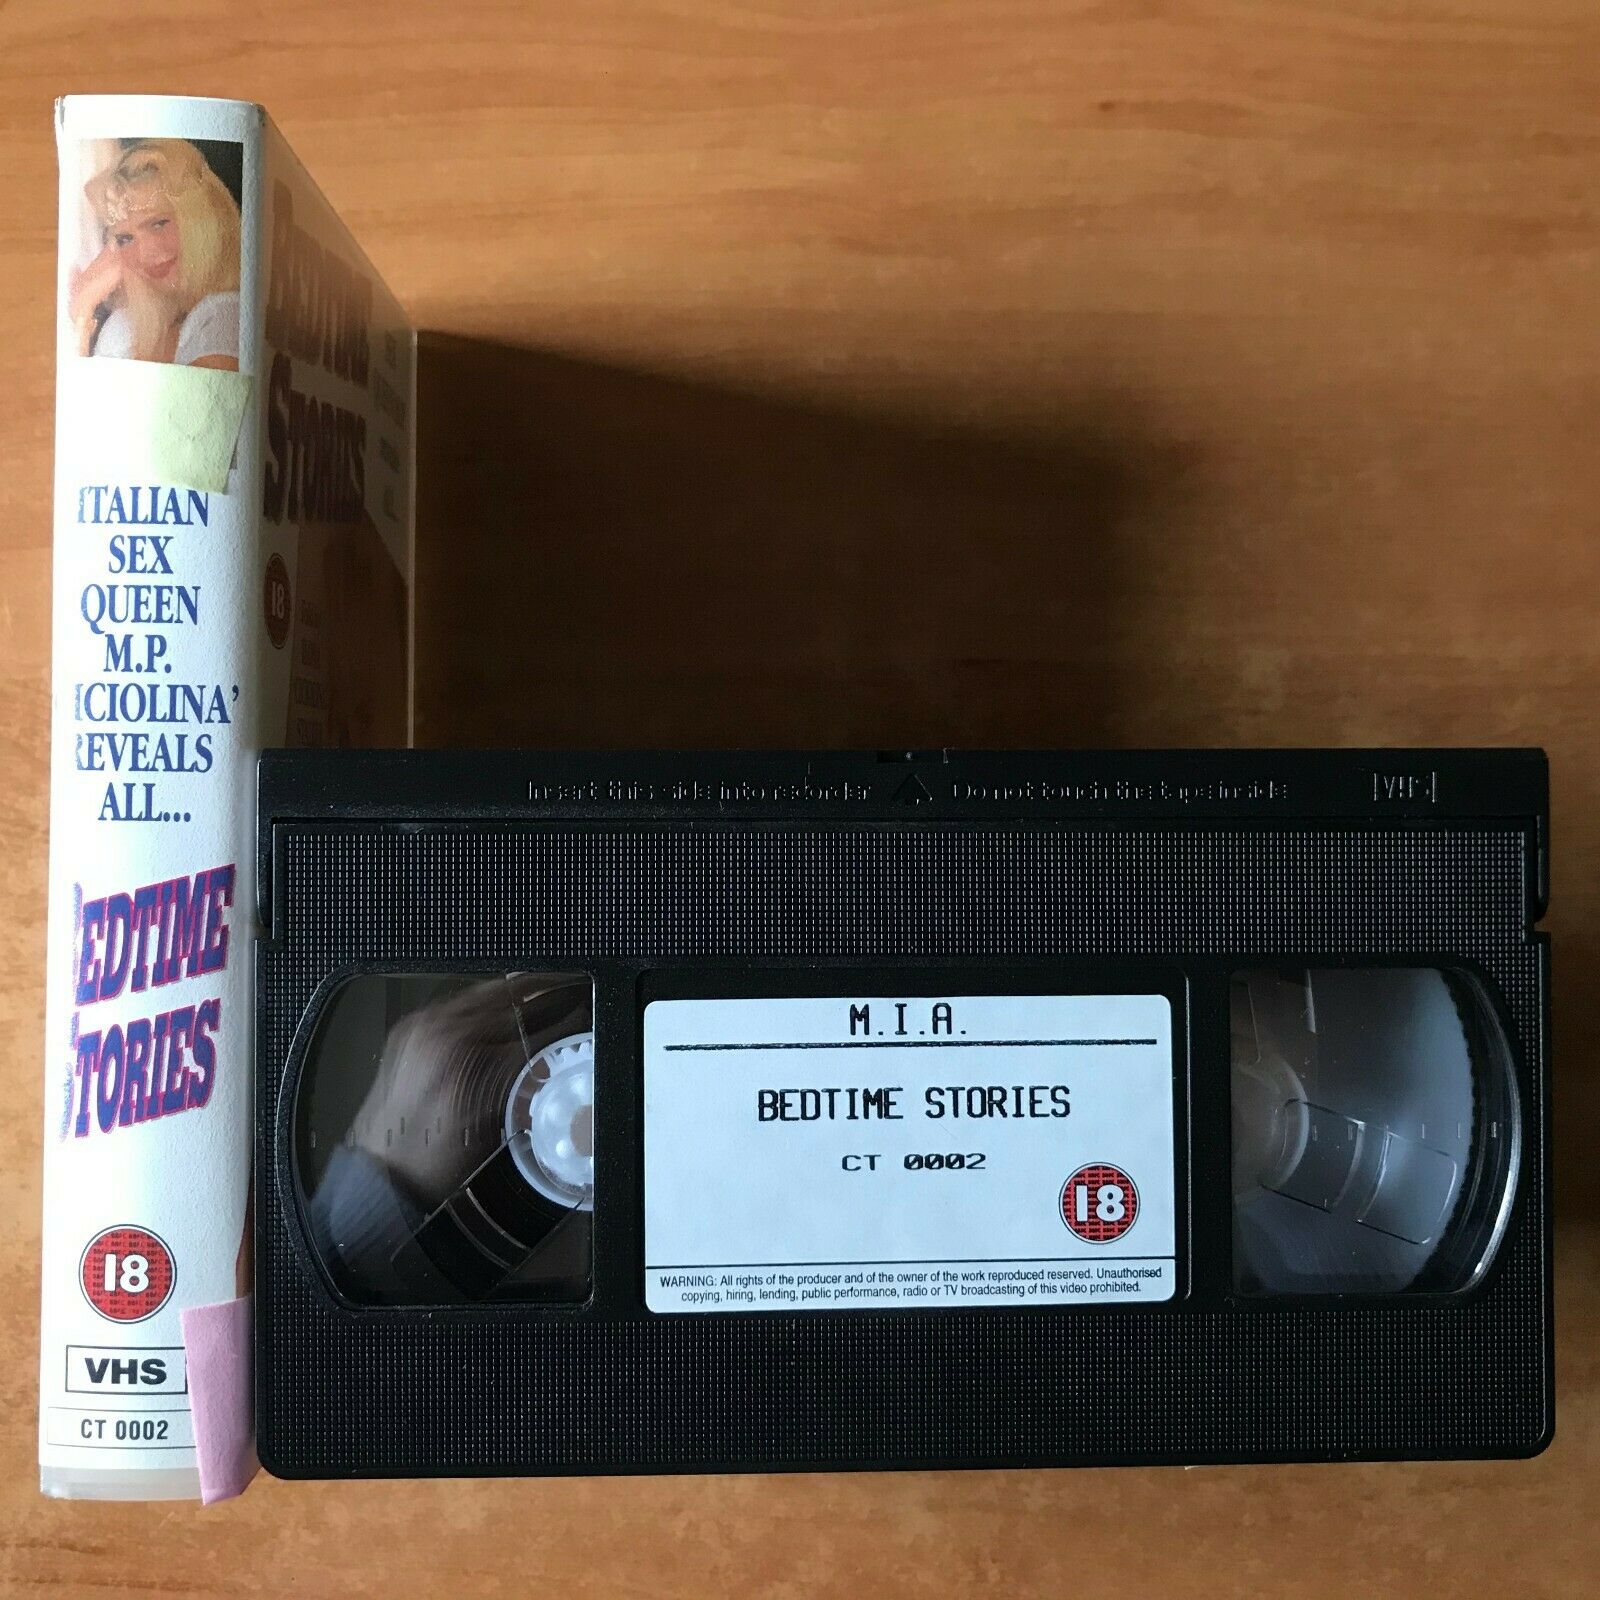 Bedtime Stories; [Ilona "Ciciolina" Staller] Erotic Comedy; Time: 60mins - VHS-